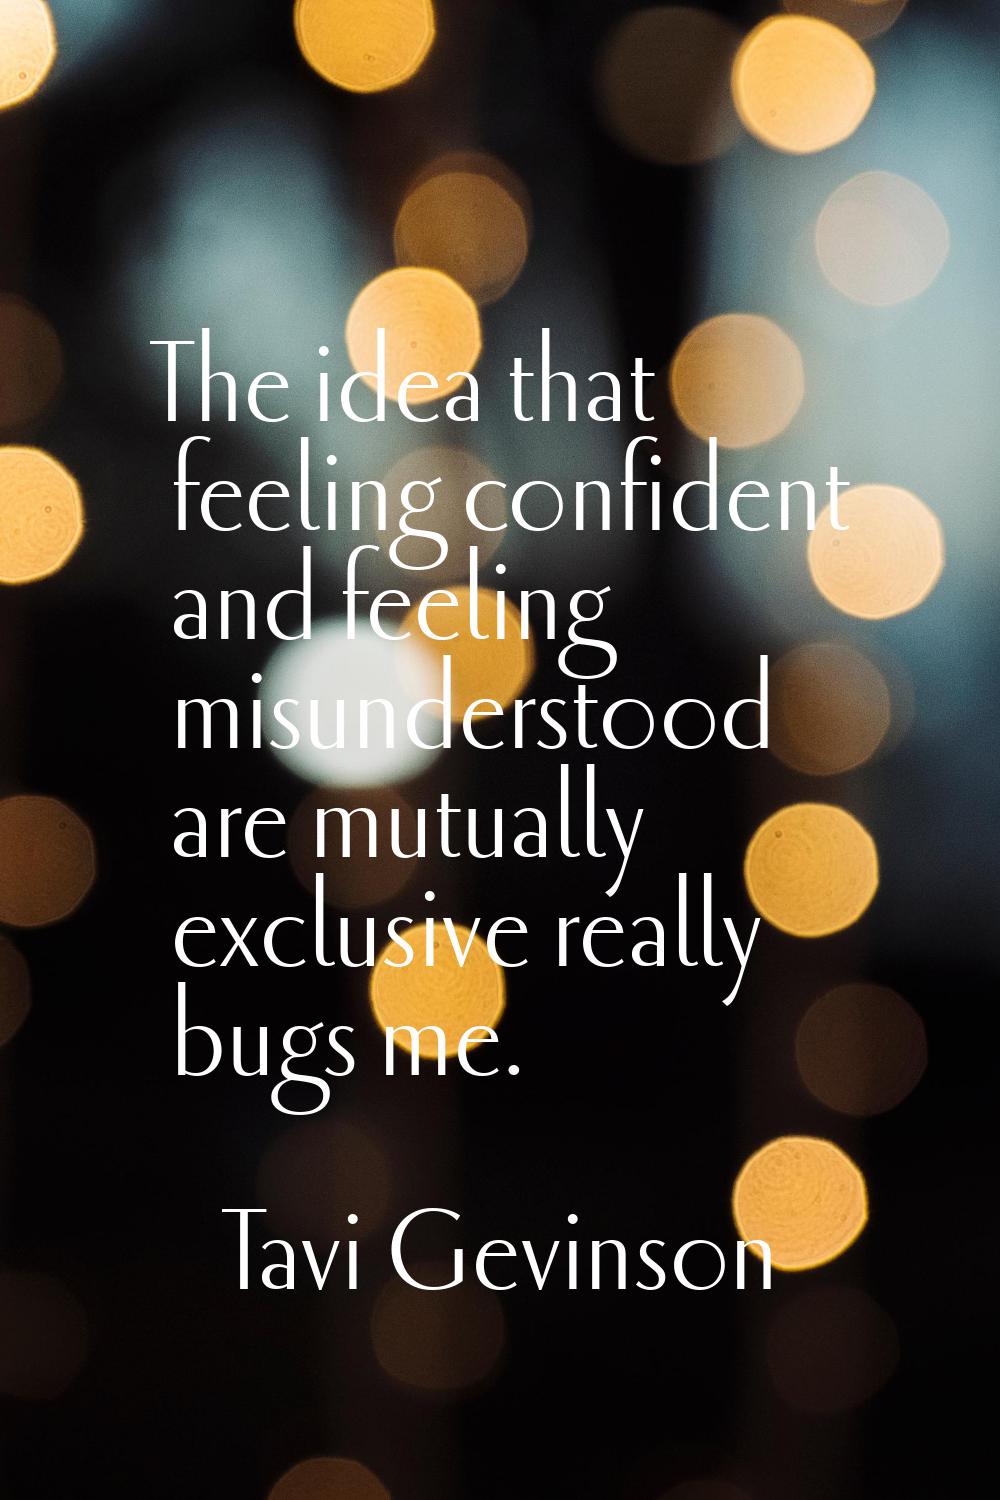 The idea that feeling confident and feeling misunderstood are mutually exclusive really bugs me.